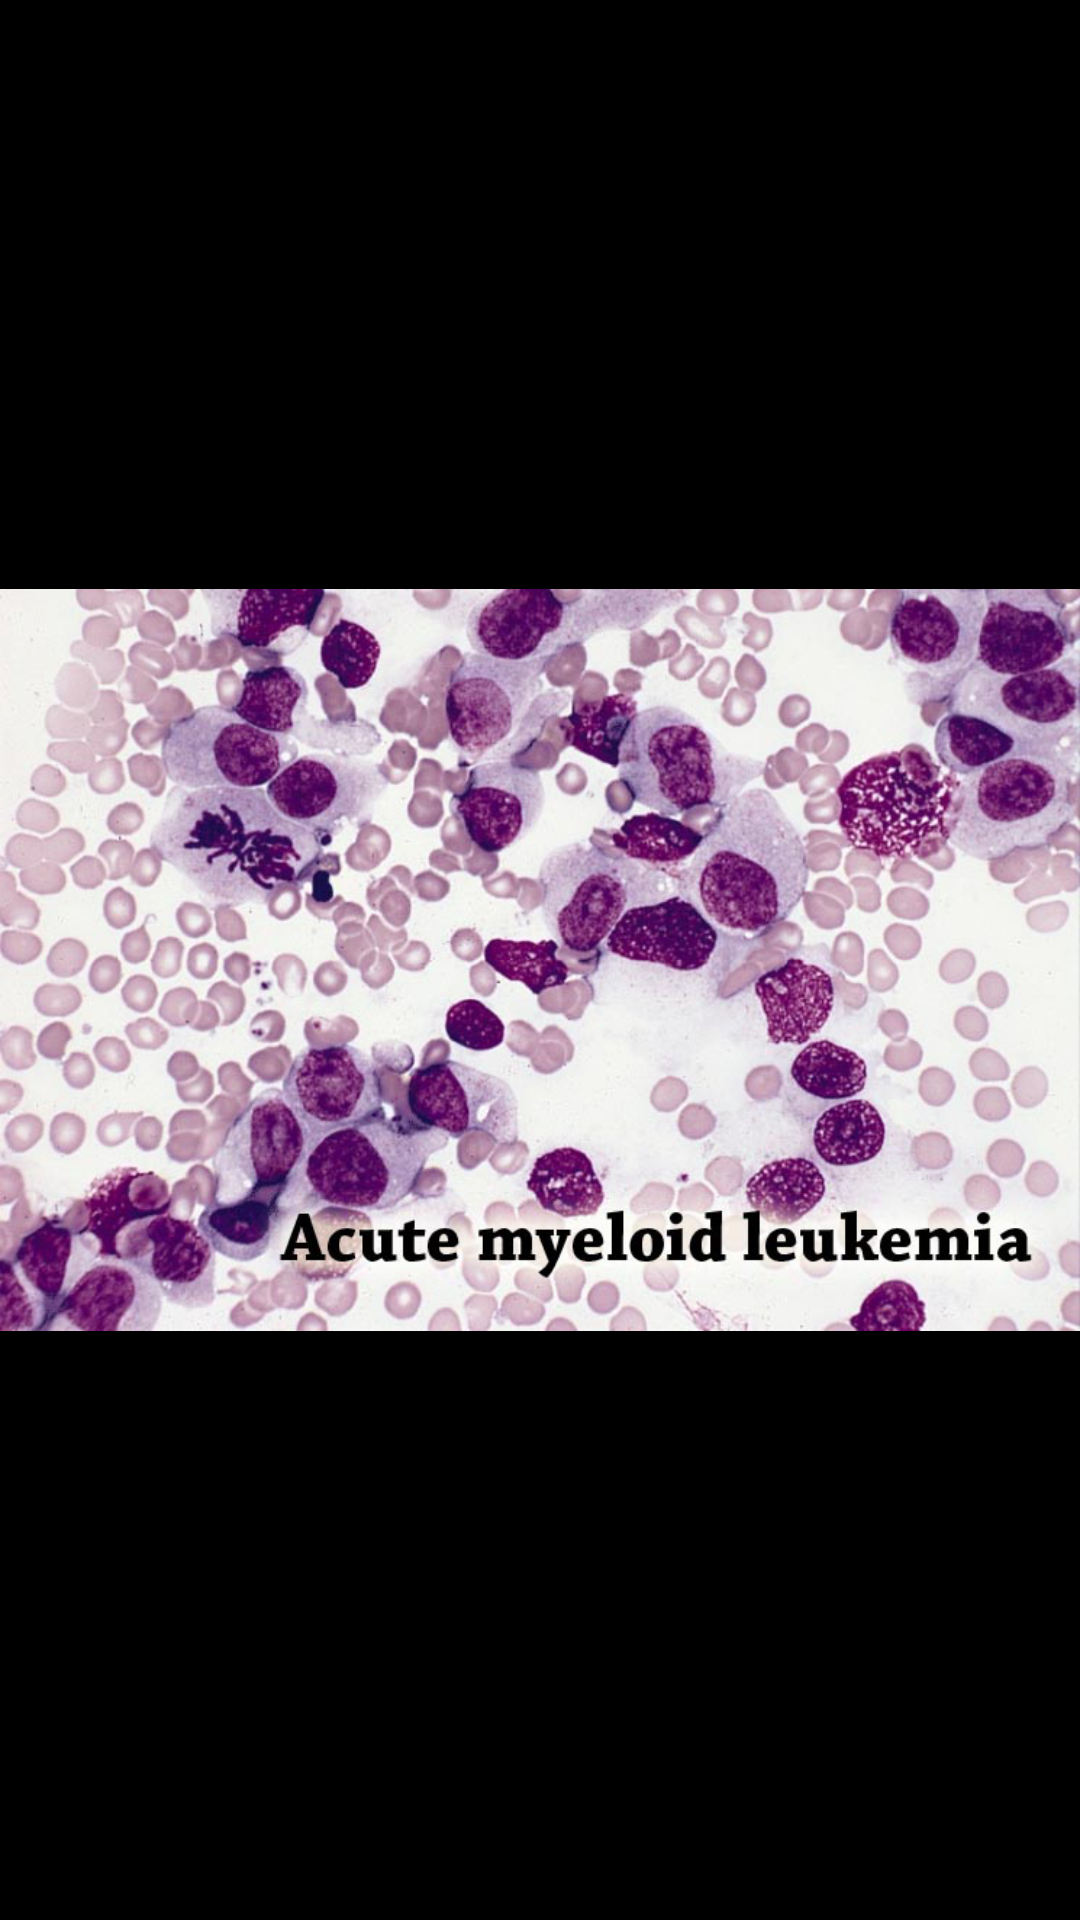 What are the signs of end stage acute myelogenous leukemia?